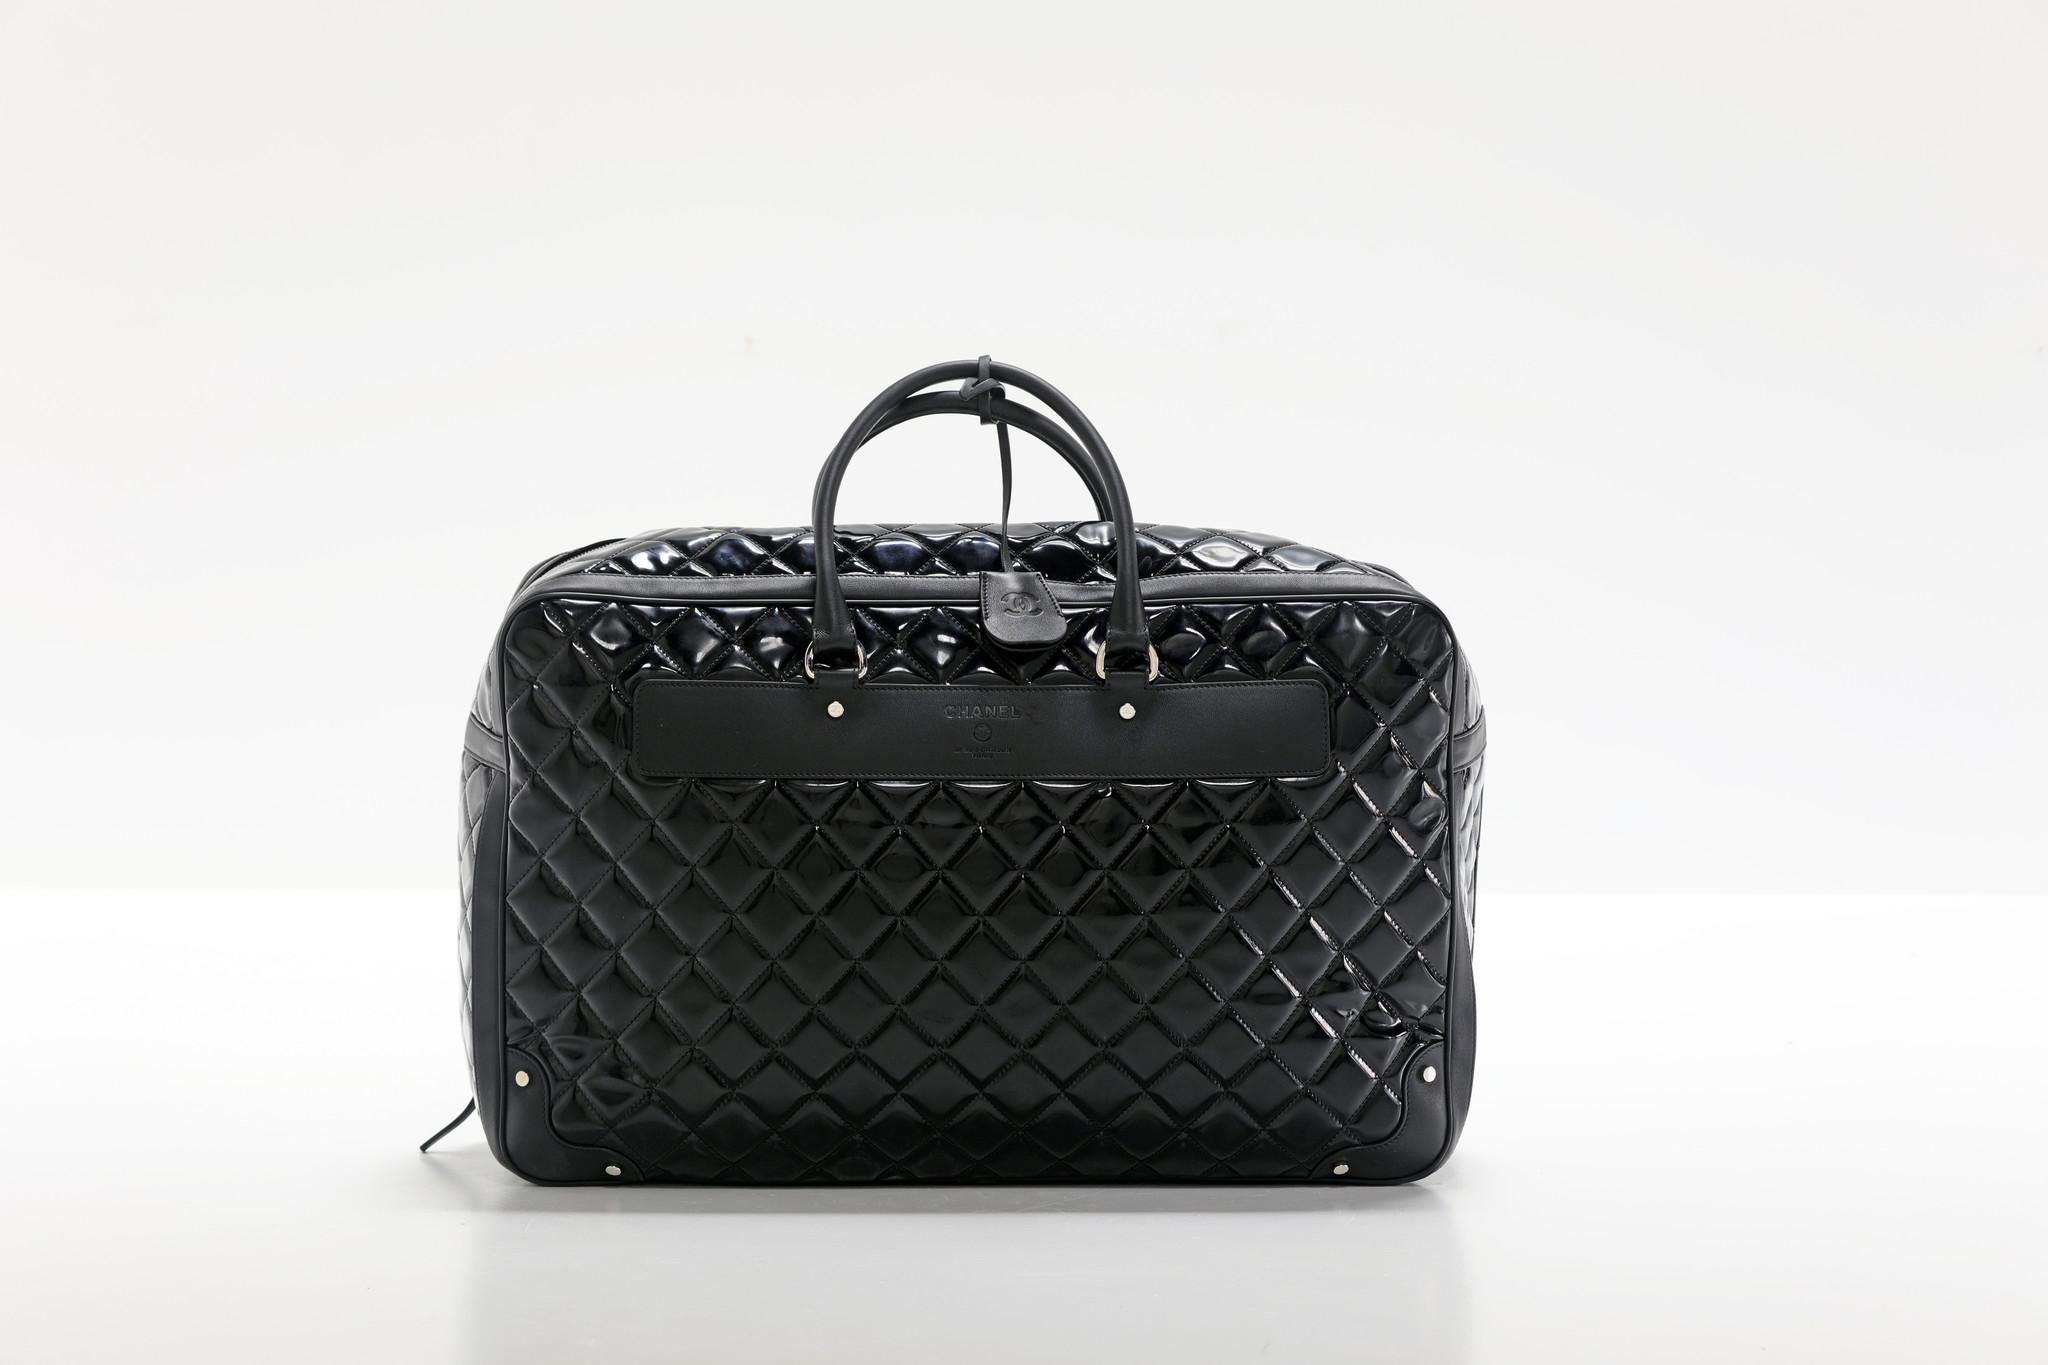 Chanel 2015 Timeless Quilted Carry-on Travel Tote Royal Black Patent Leather Bag For Sale 2